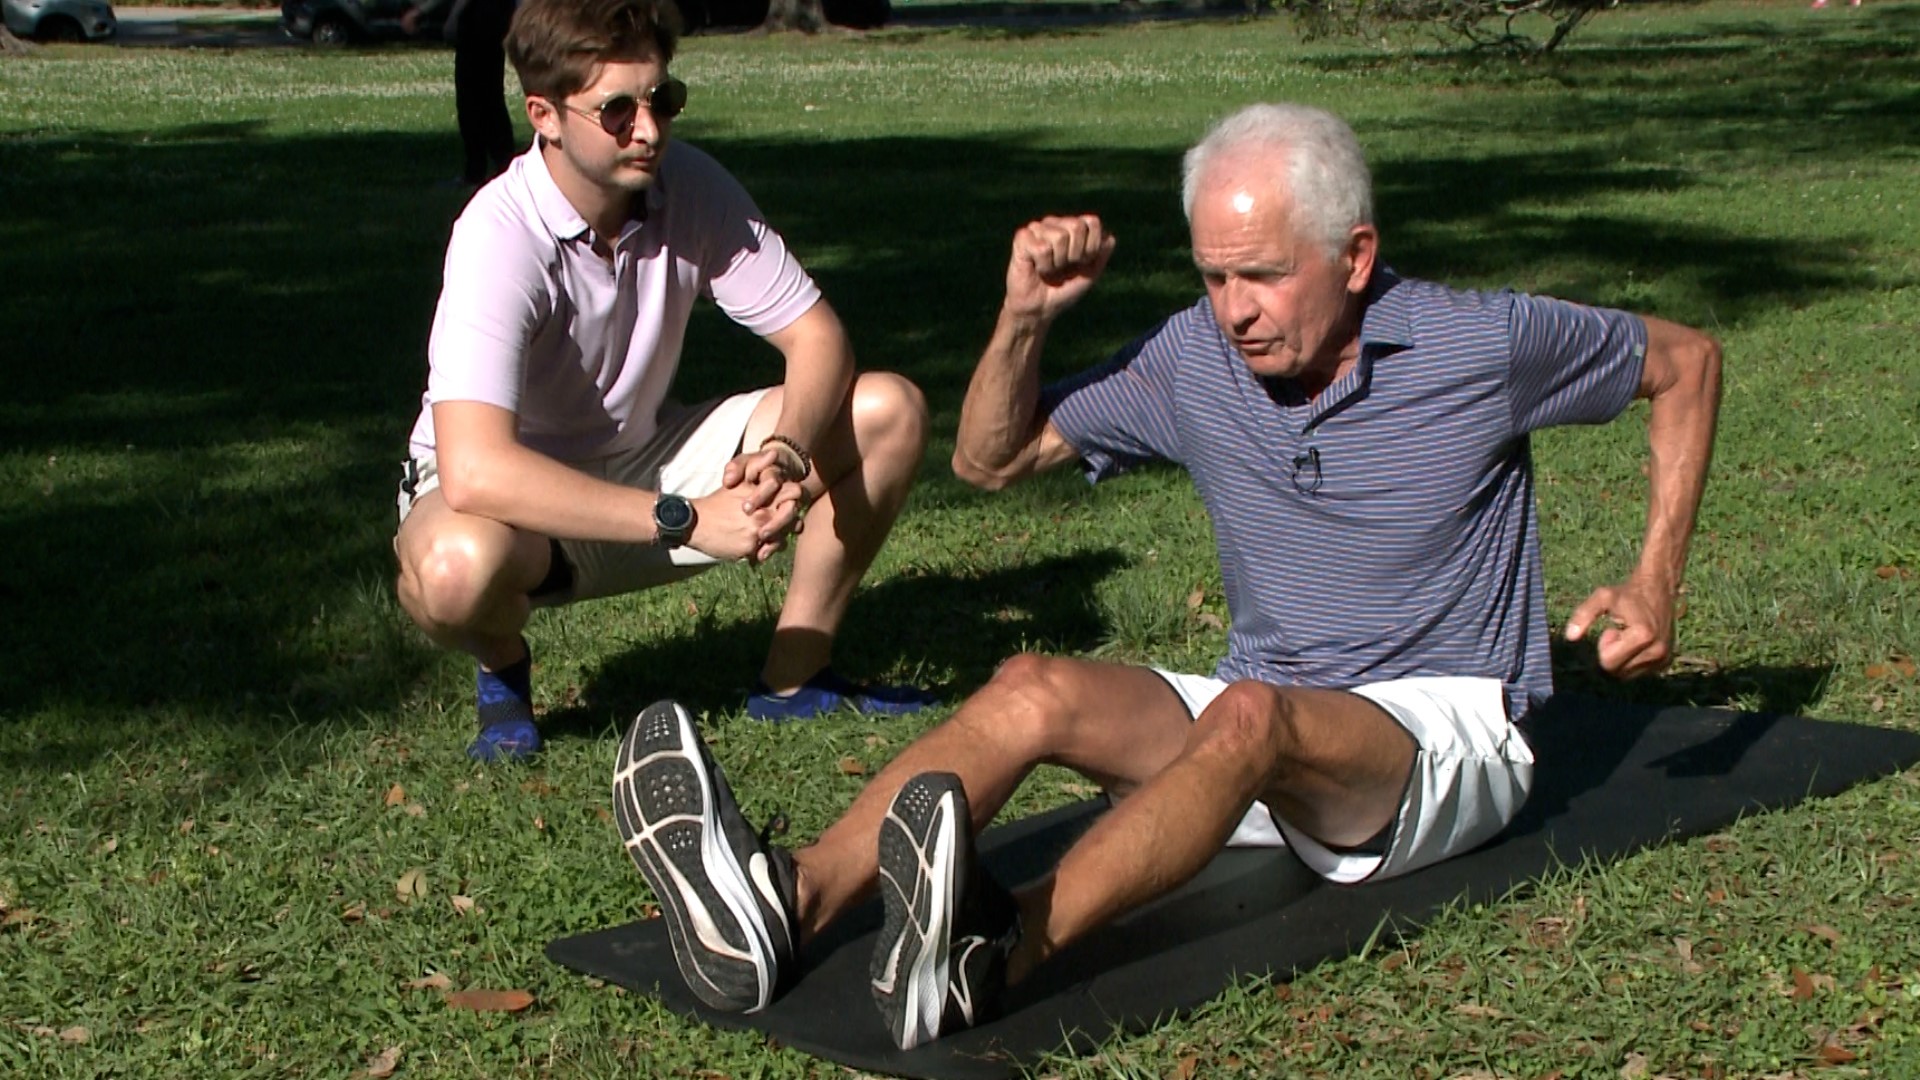 WWL Louisiana health & fitness experts Mackie and Spencer Shilstone share static and dynamic stretches to optimize your next run.